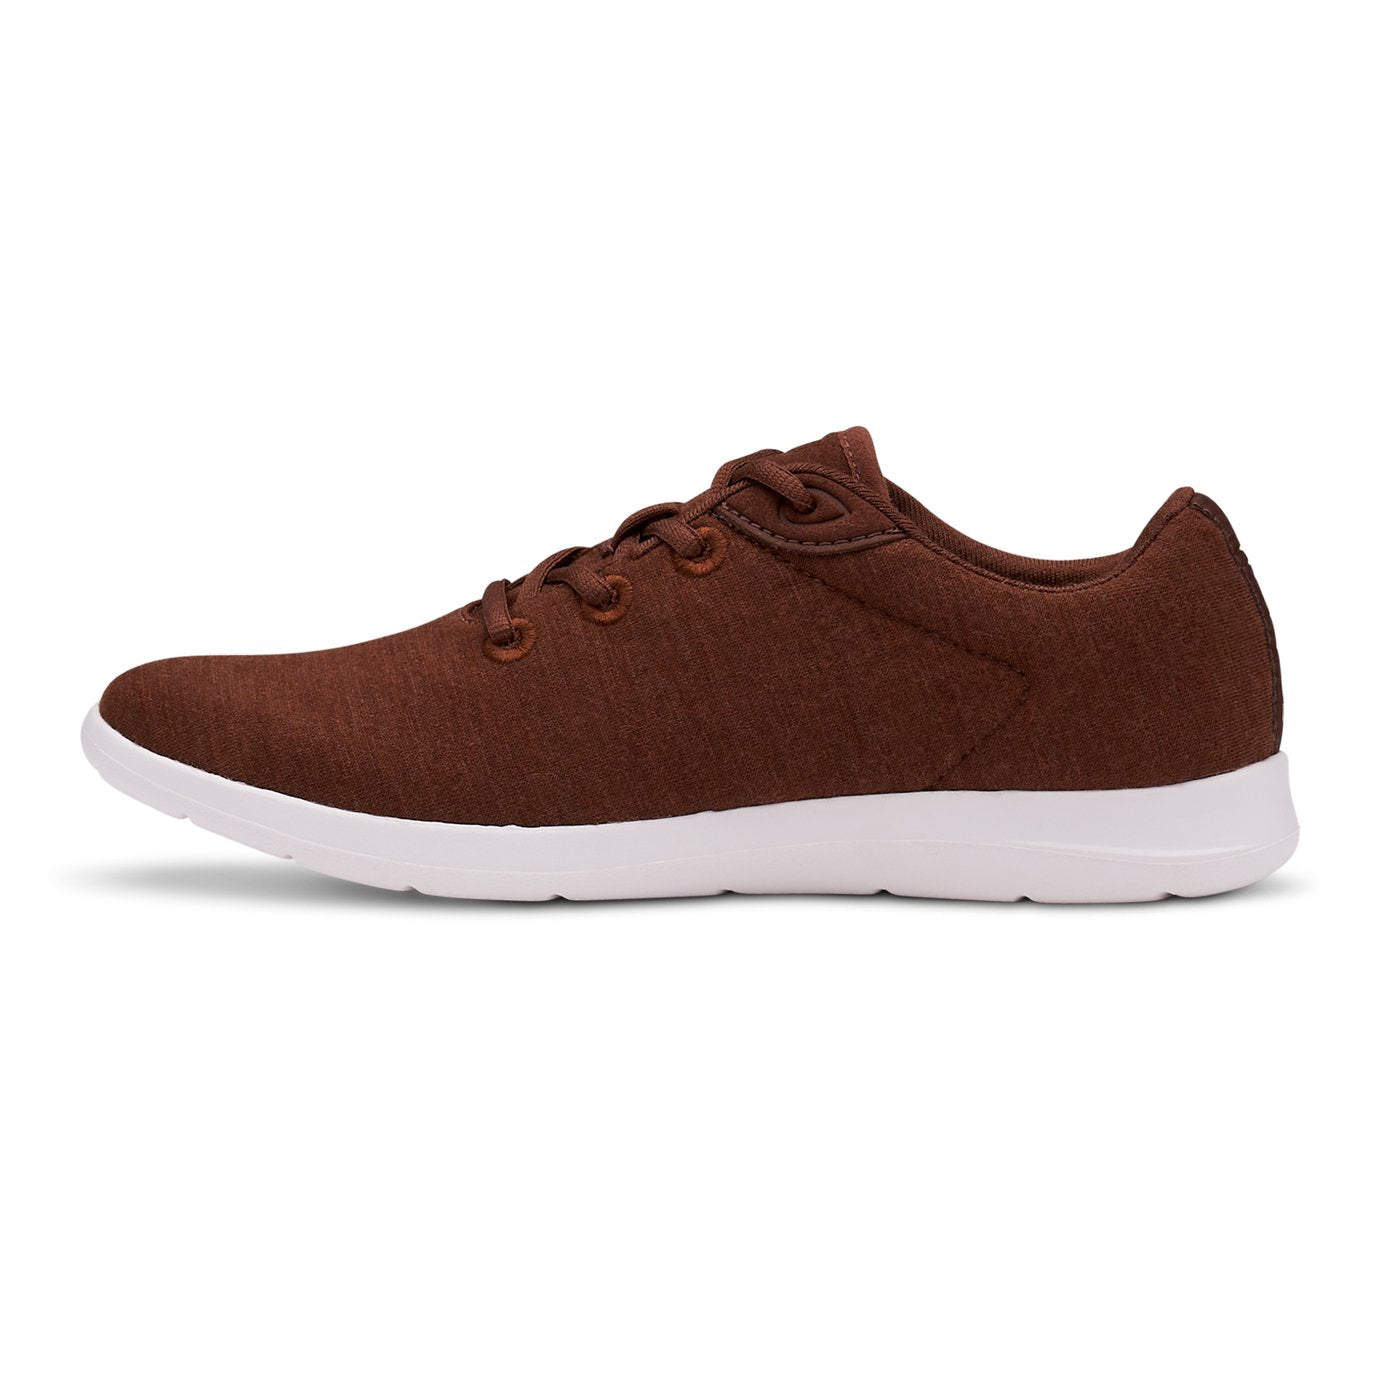 Men's Lace-Ups Brown - Special Offer